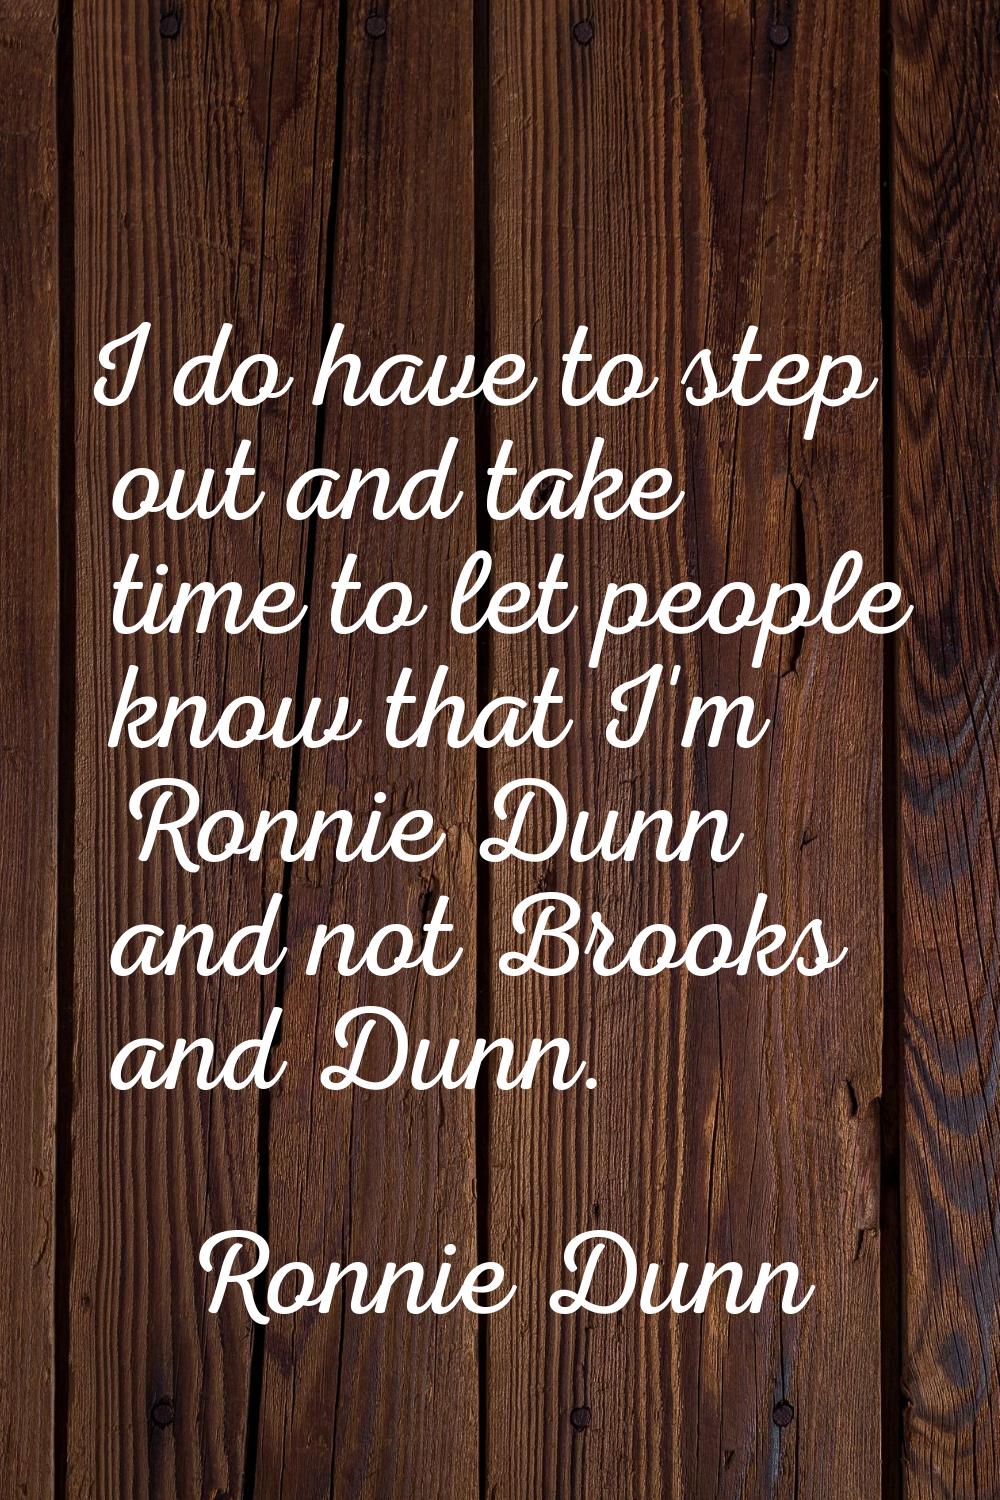 I do have to step out and take time to let people know that I'm Ronnie Dunn and not Brooks and Dunn